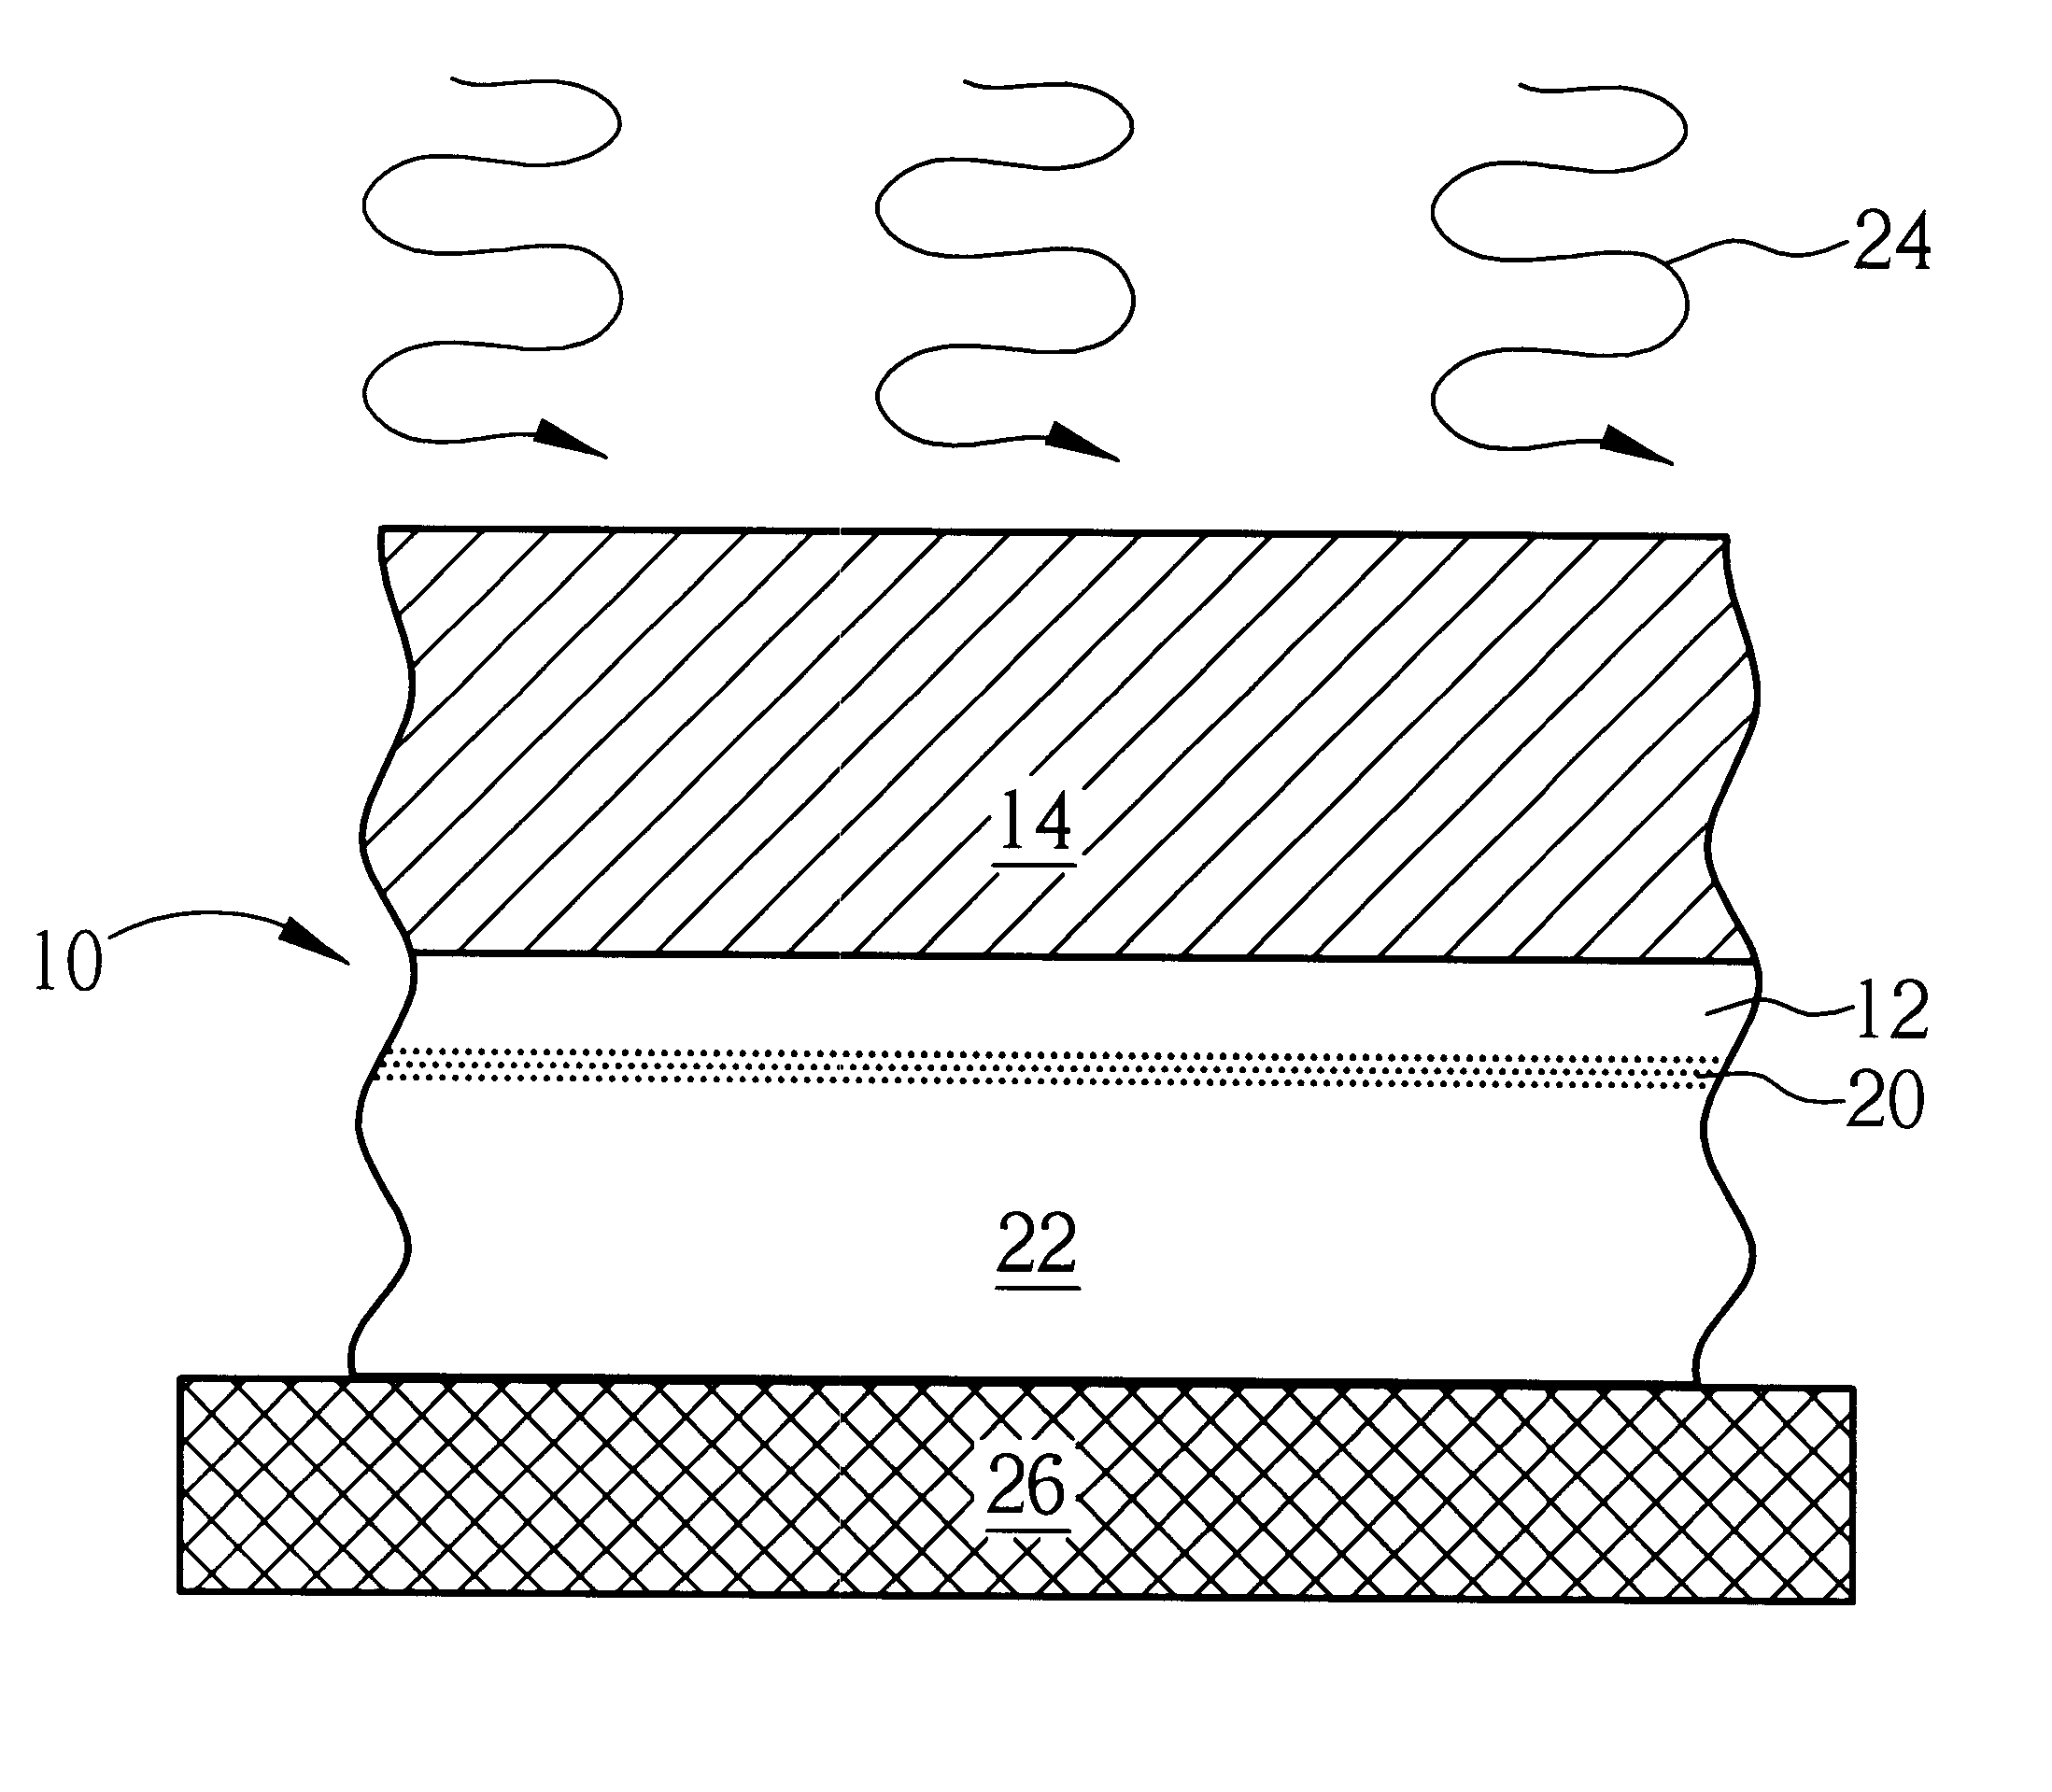 Manufacturing method of a thin film on a substrate